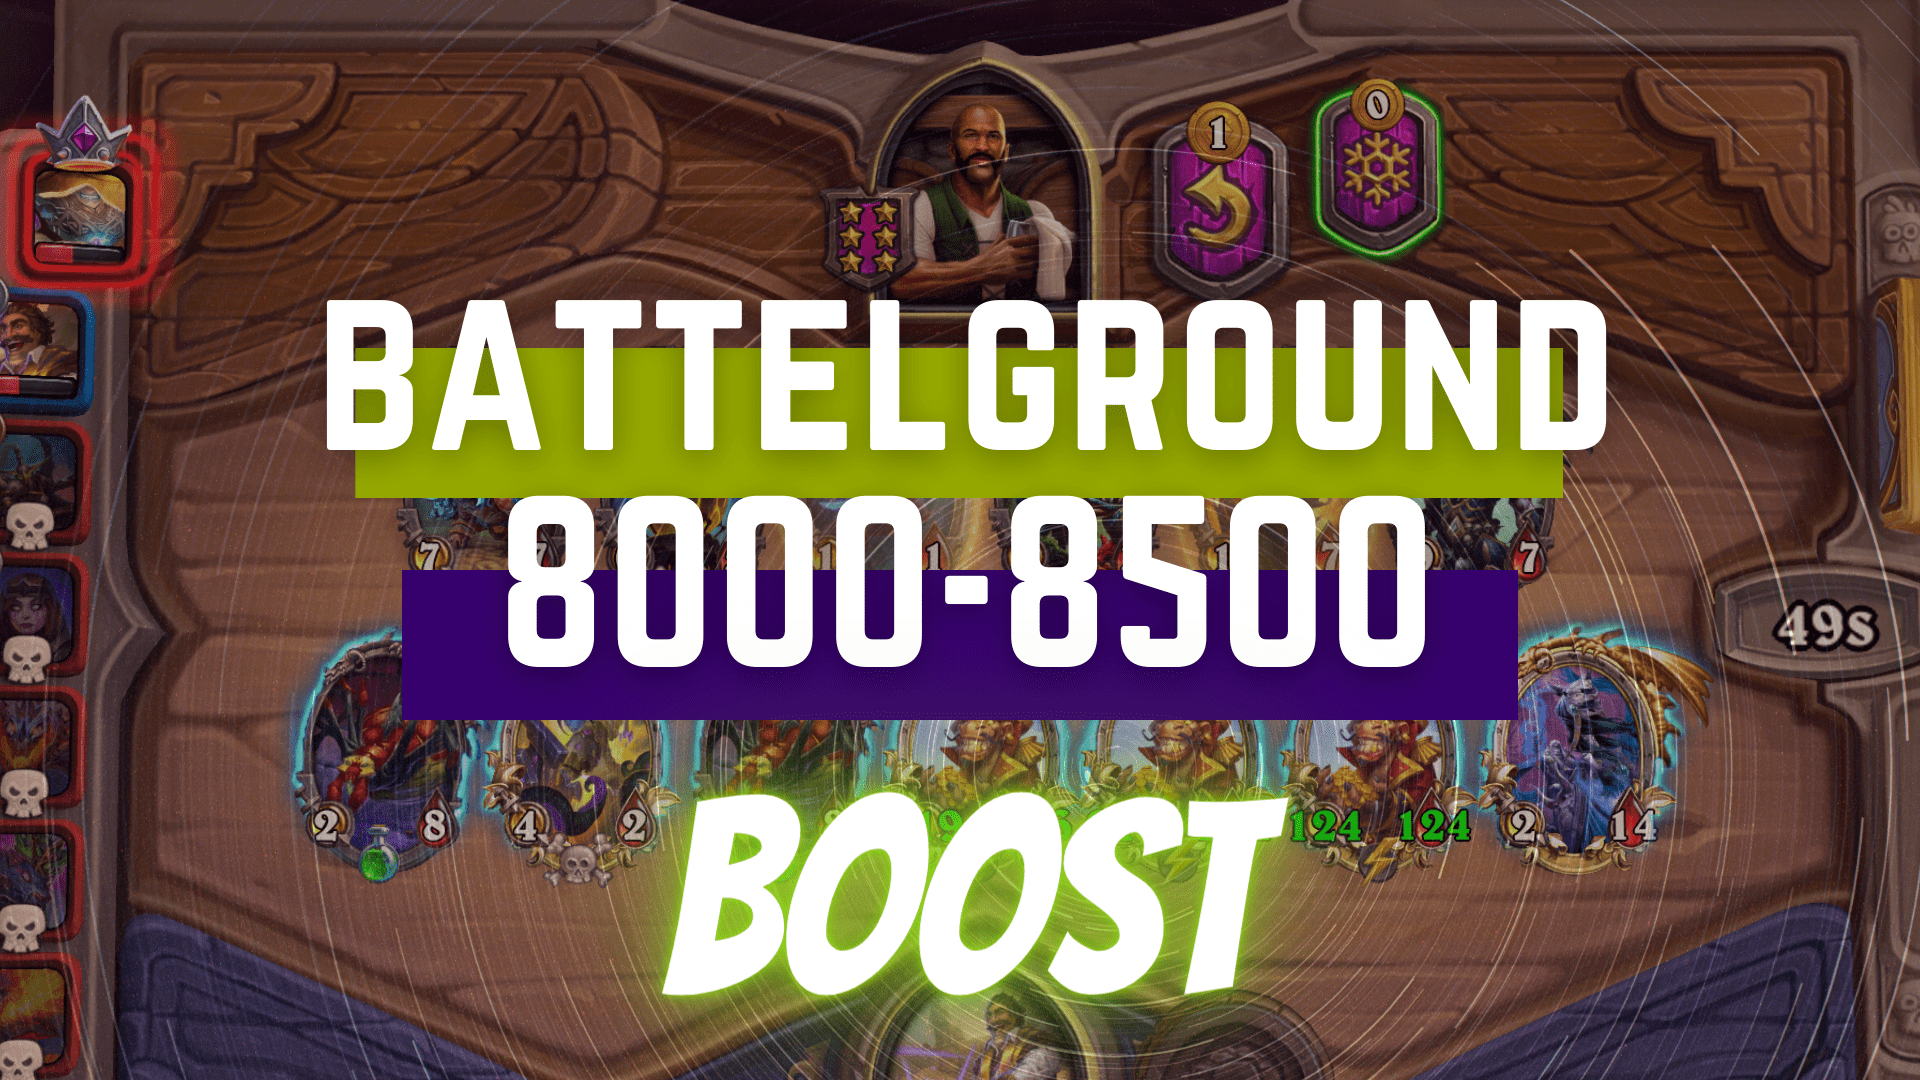 [BATTLEGROUNDS RATING] BOOST FROM 8000 TO 8500 GBD - e2p.com